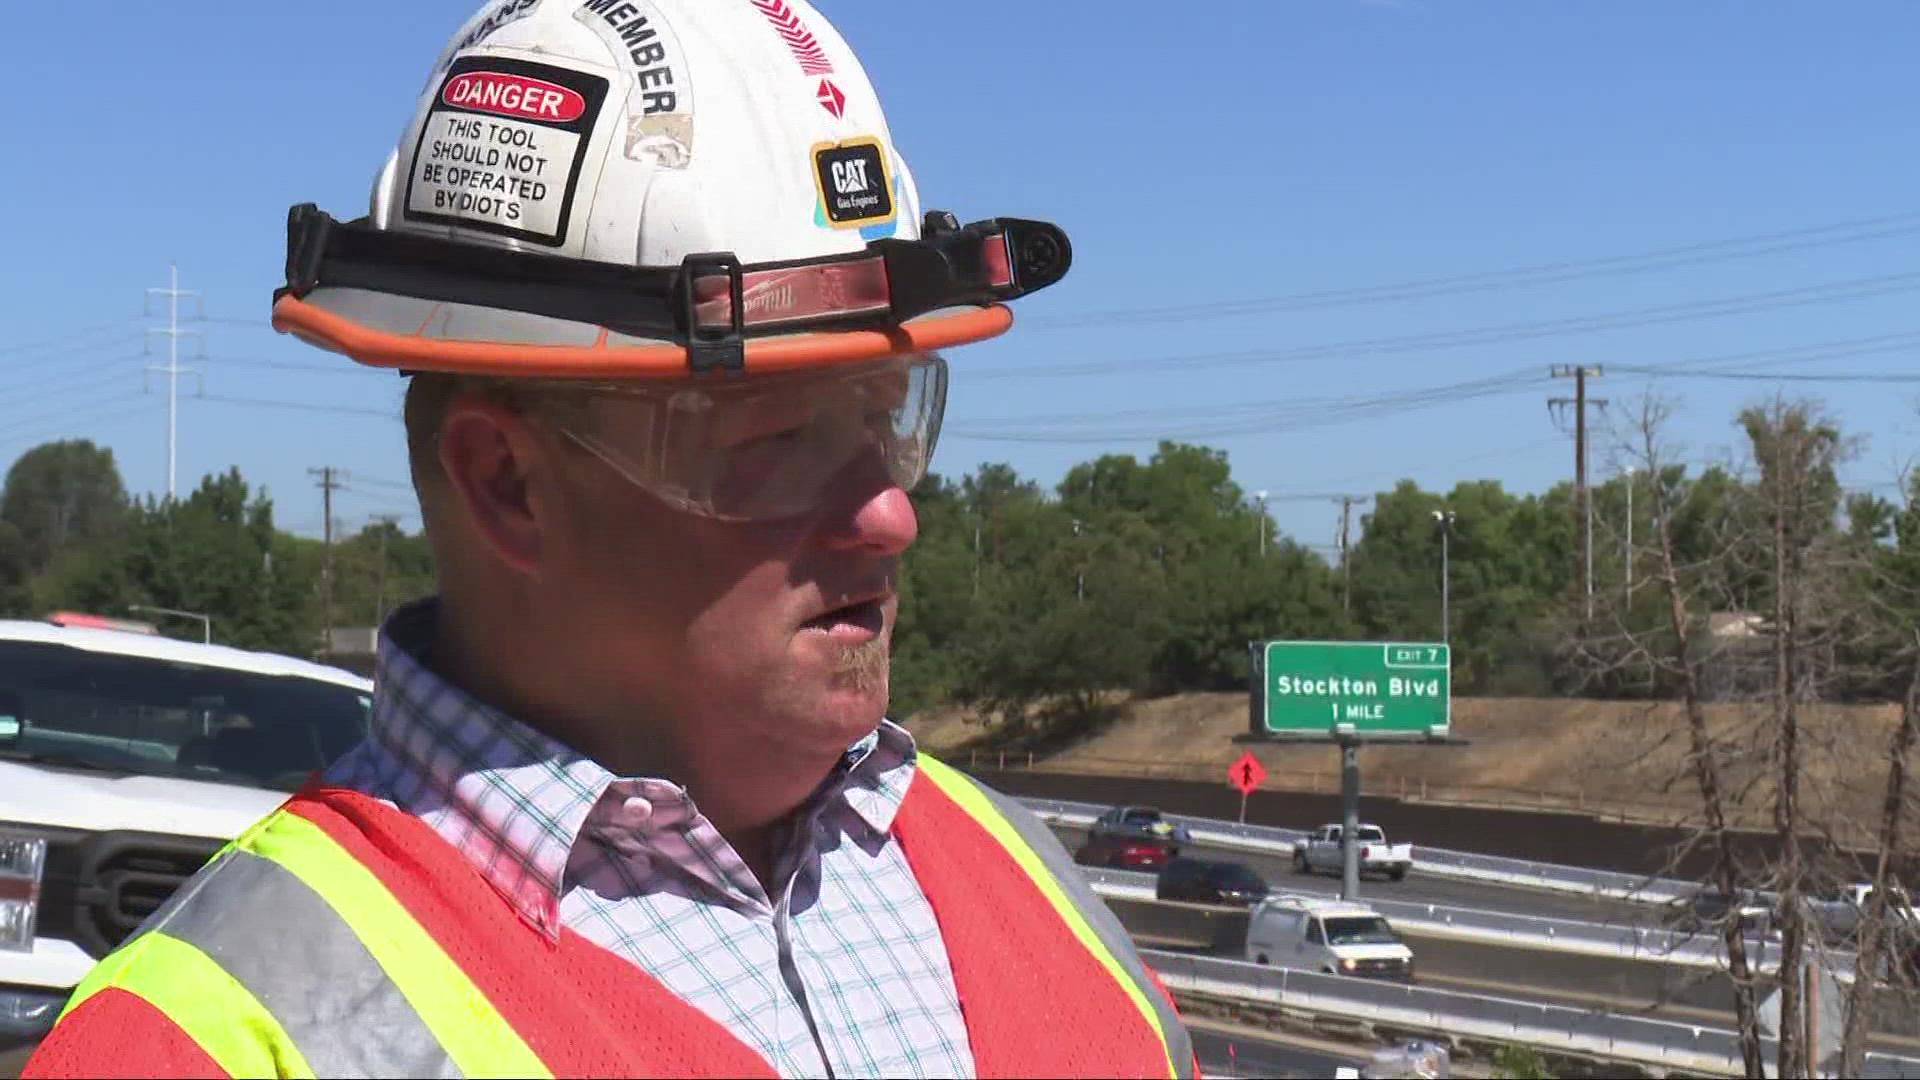 Employees from Caltrans recall several incidents where workers have been hit during construction projects of busy highways.